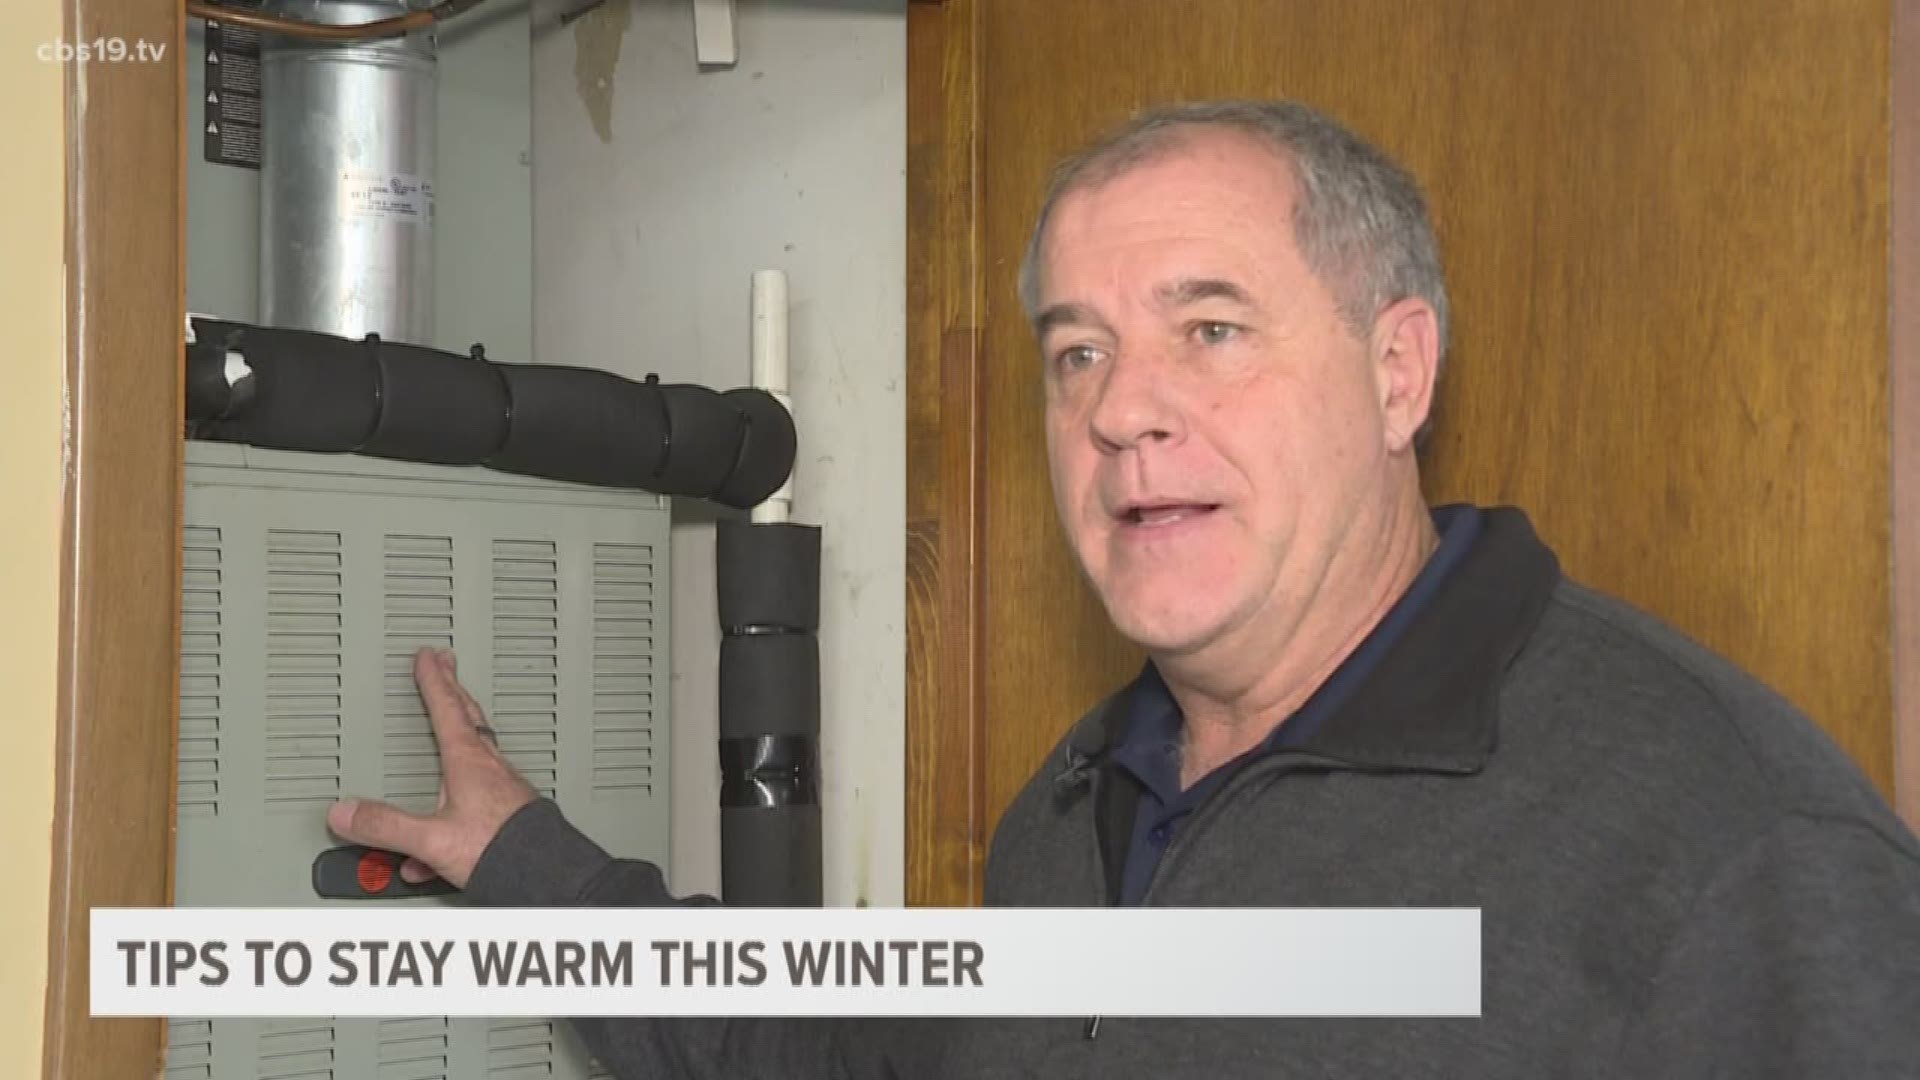 Here's a few tips to help you prepare your home for the colder temperatures.